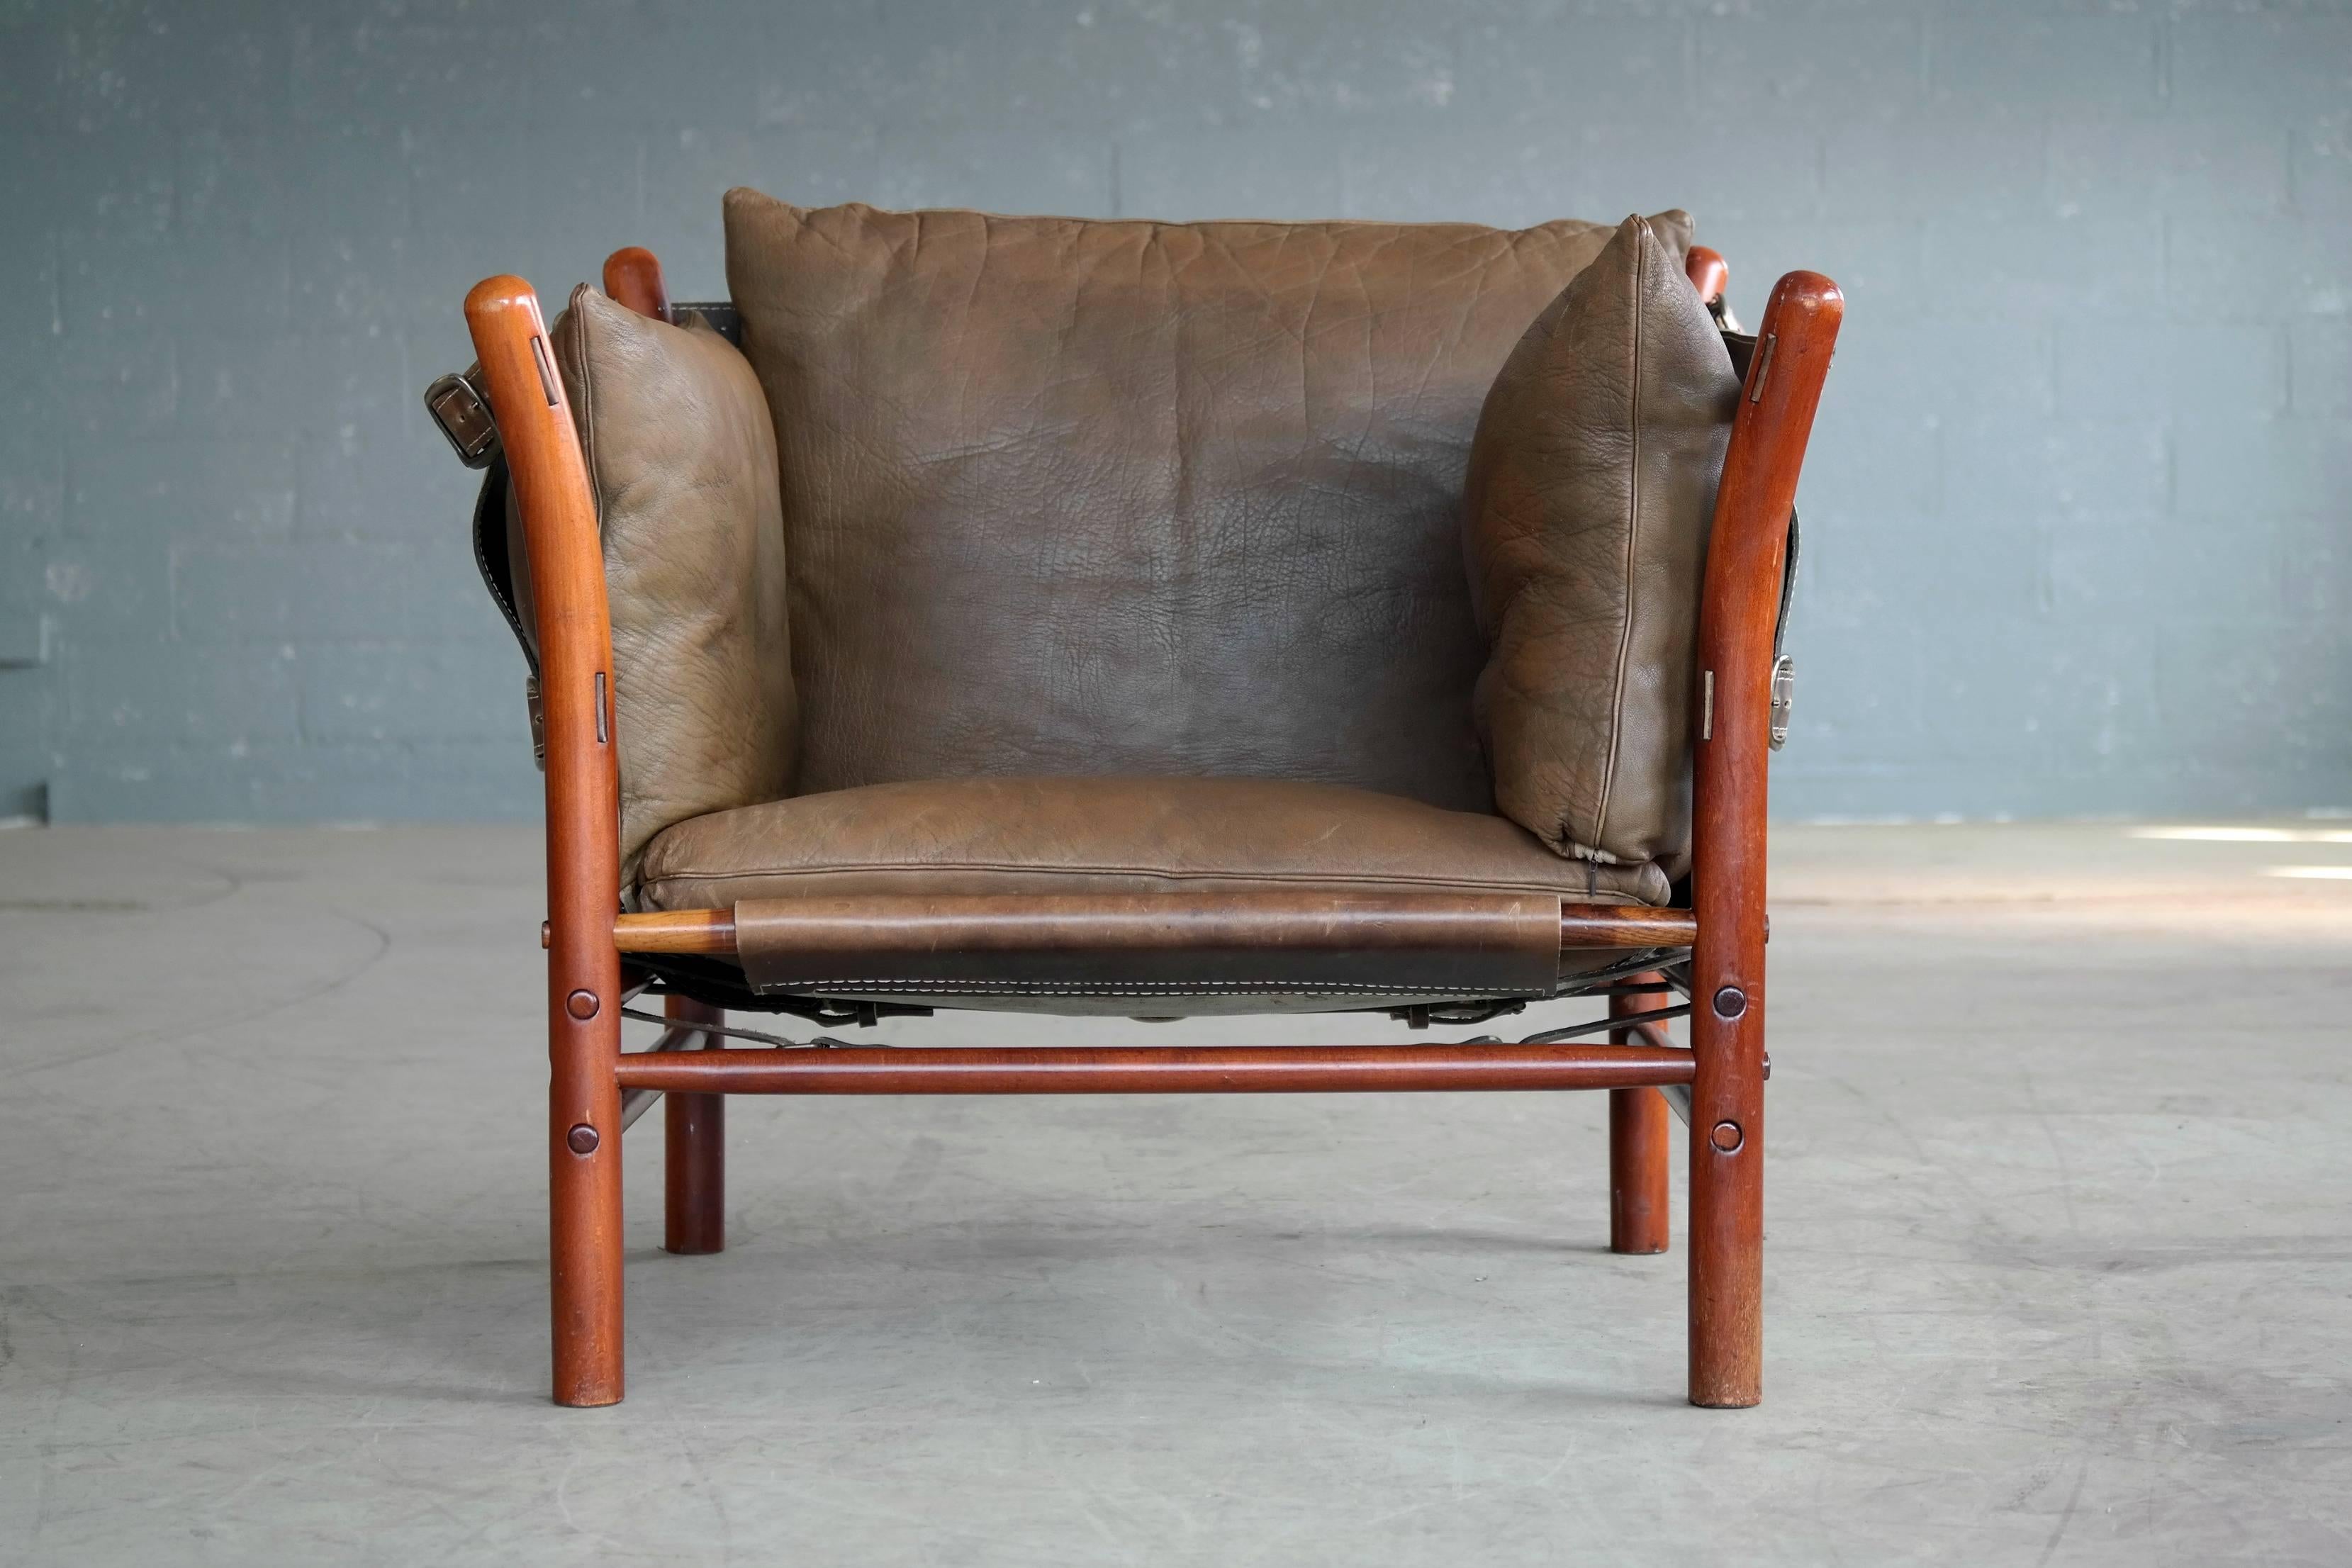 Beautiful 1960s safari chair and ottoman in chocolate brown colored buffalo leather and stained beechwood designed by Arne Norell in the 1960s for Norell Mobler, Sweden. The chair is assembled without any screws or hardware and held together by the